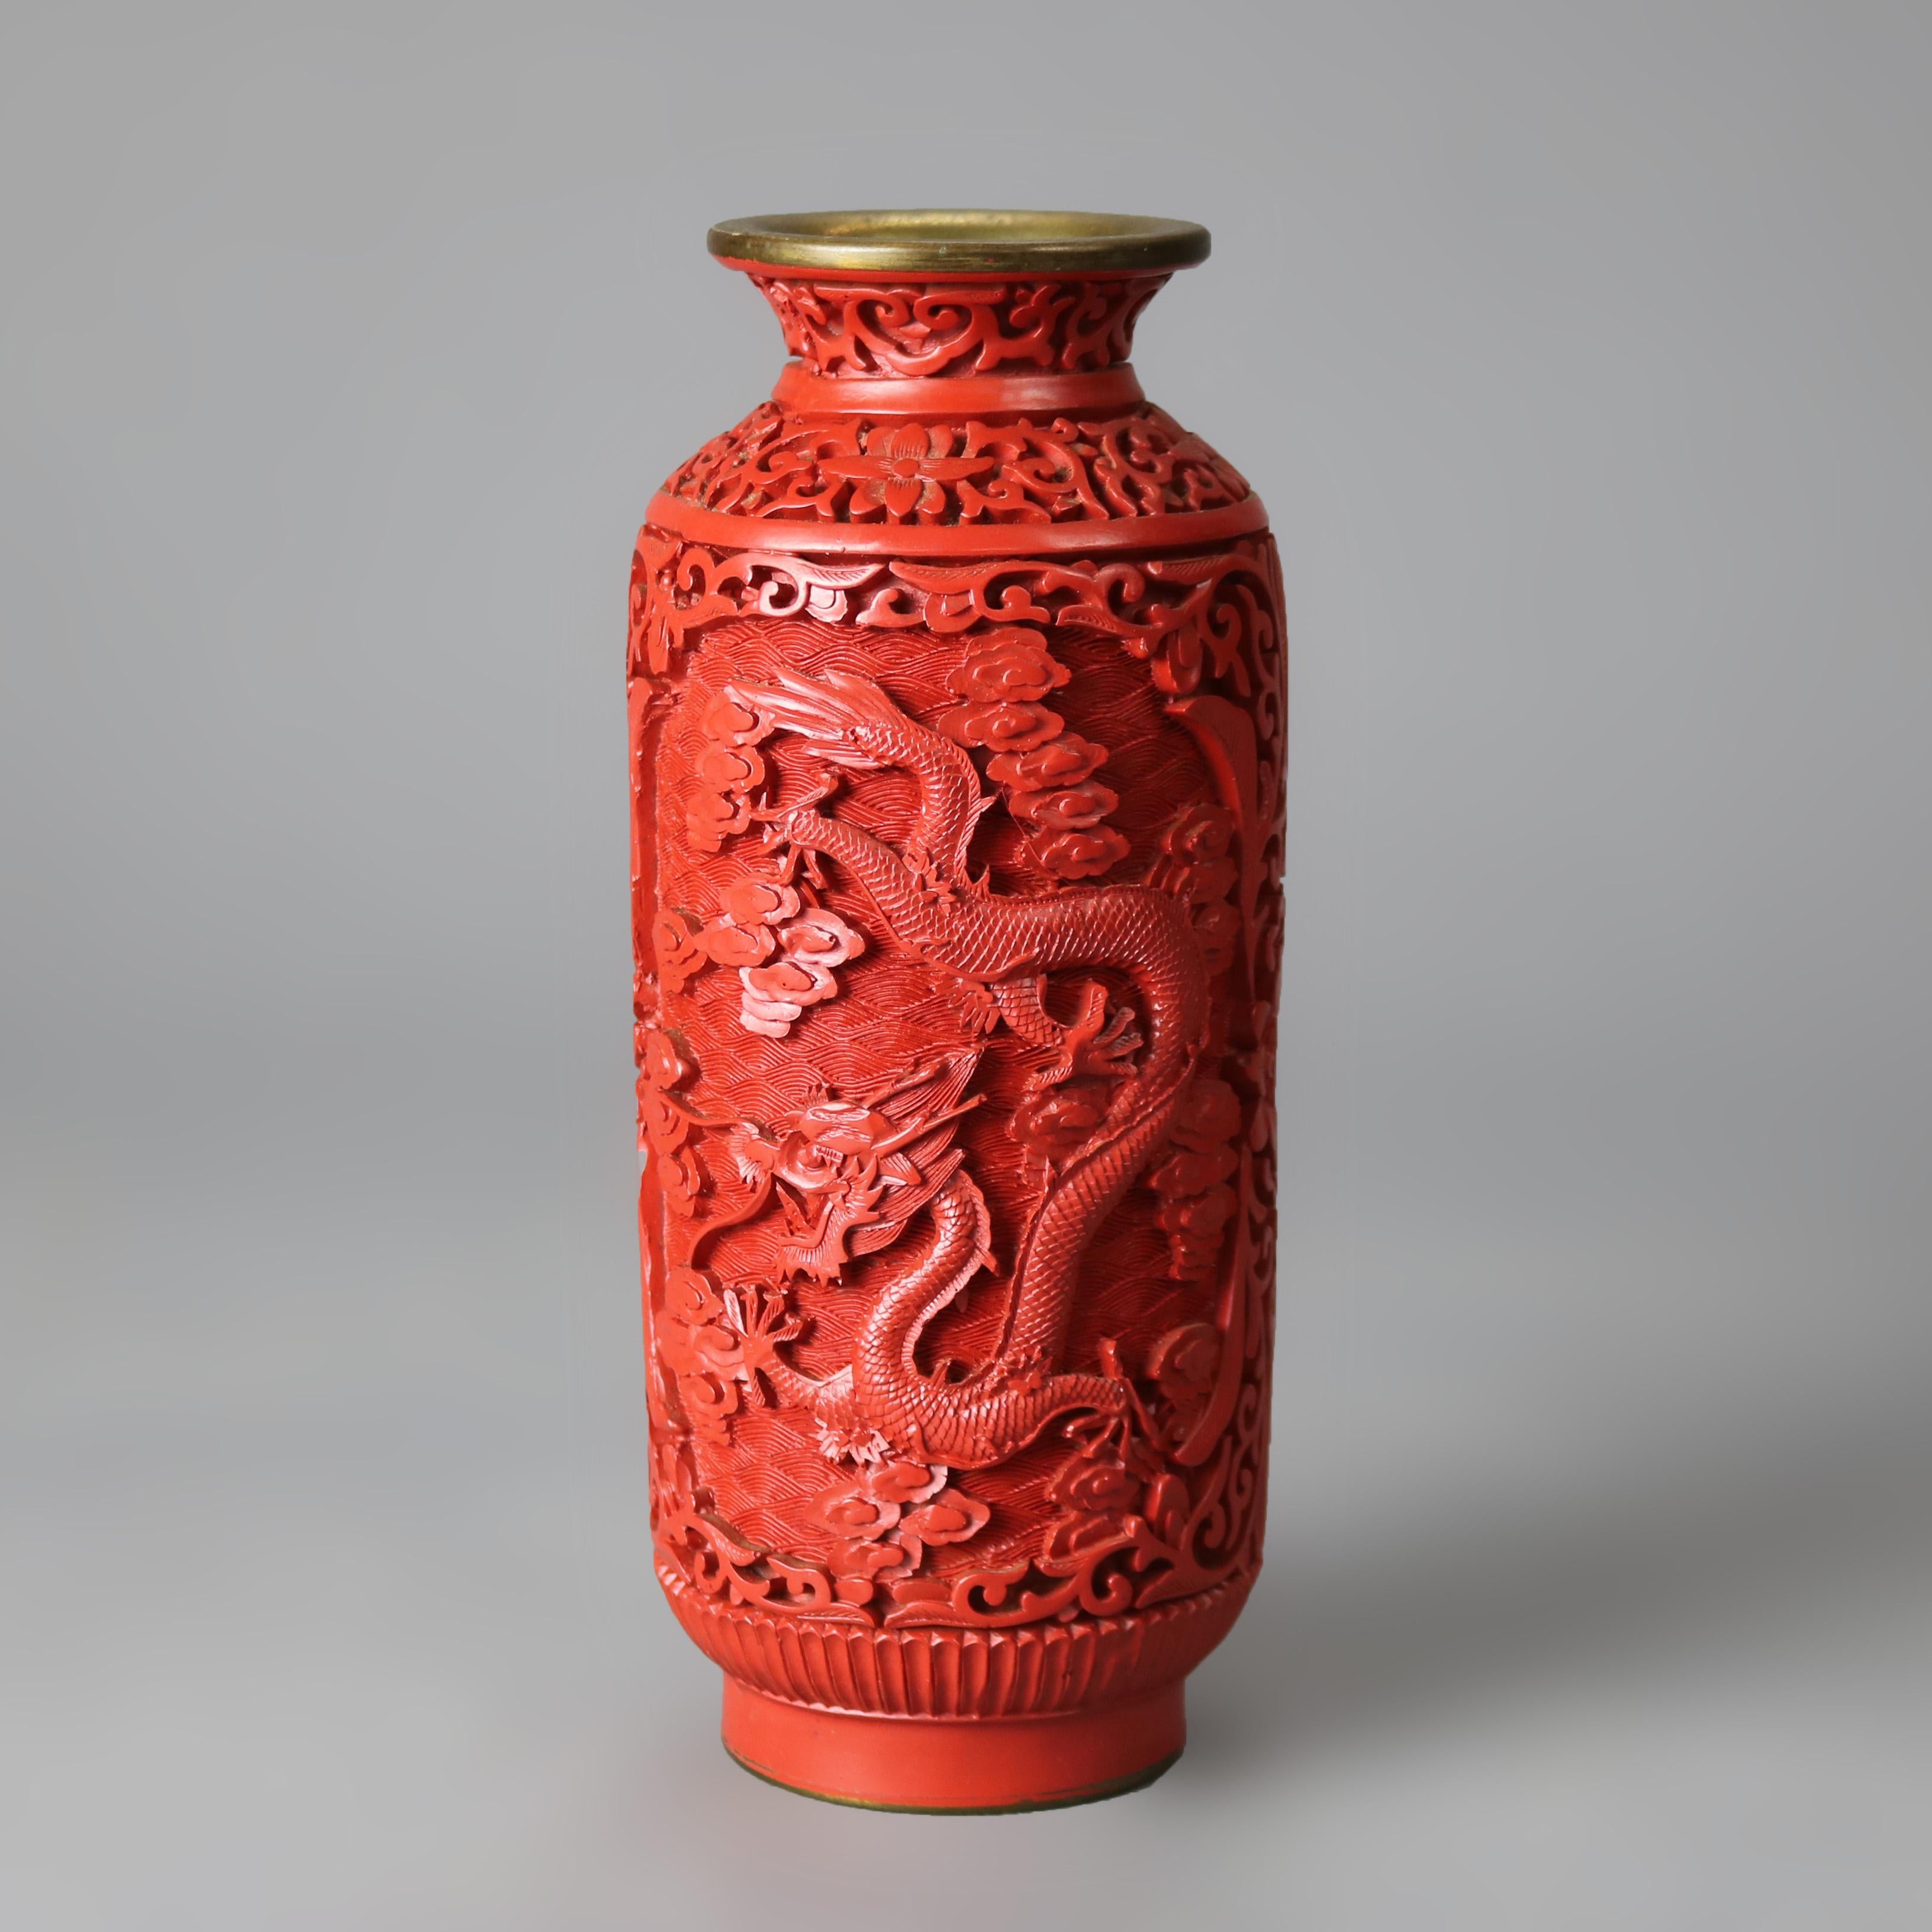 An antique Chinese Cinnabar vase offers dragon and foliate decoration, c1920

Measures - 8